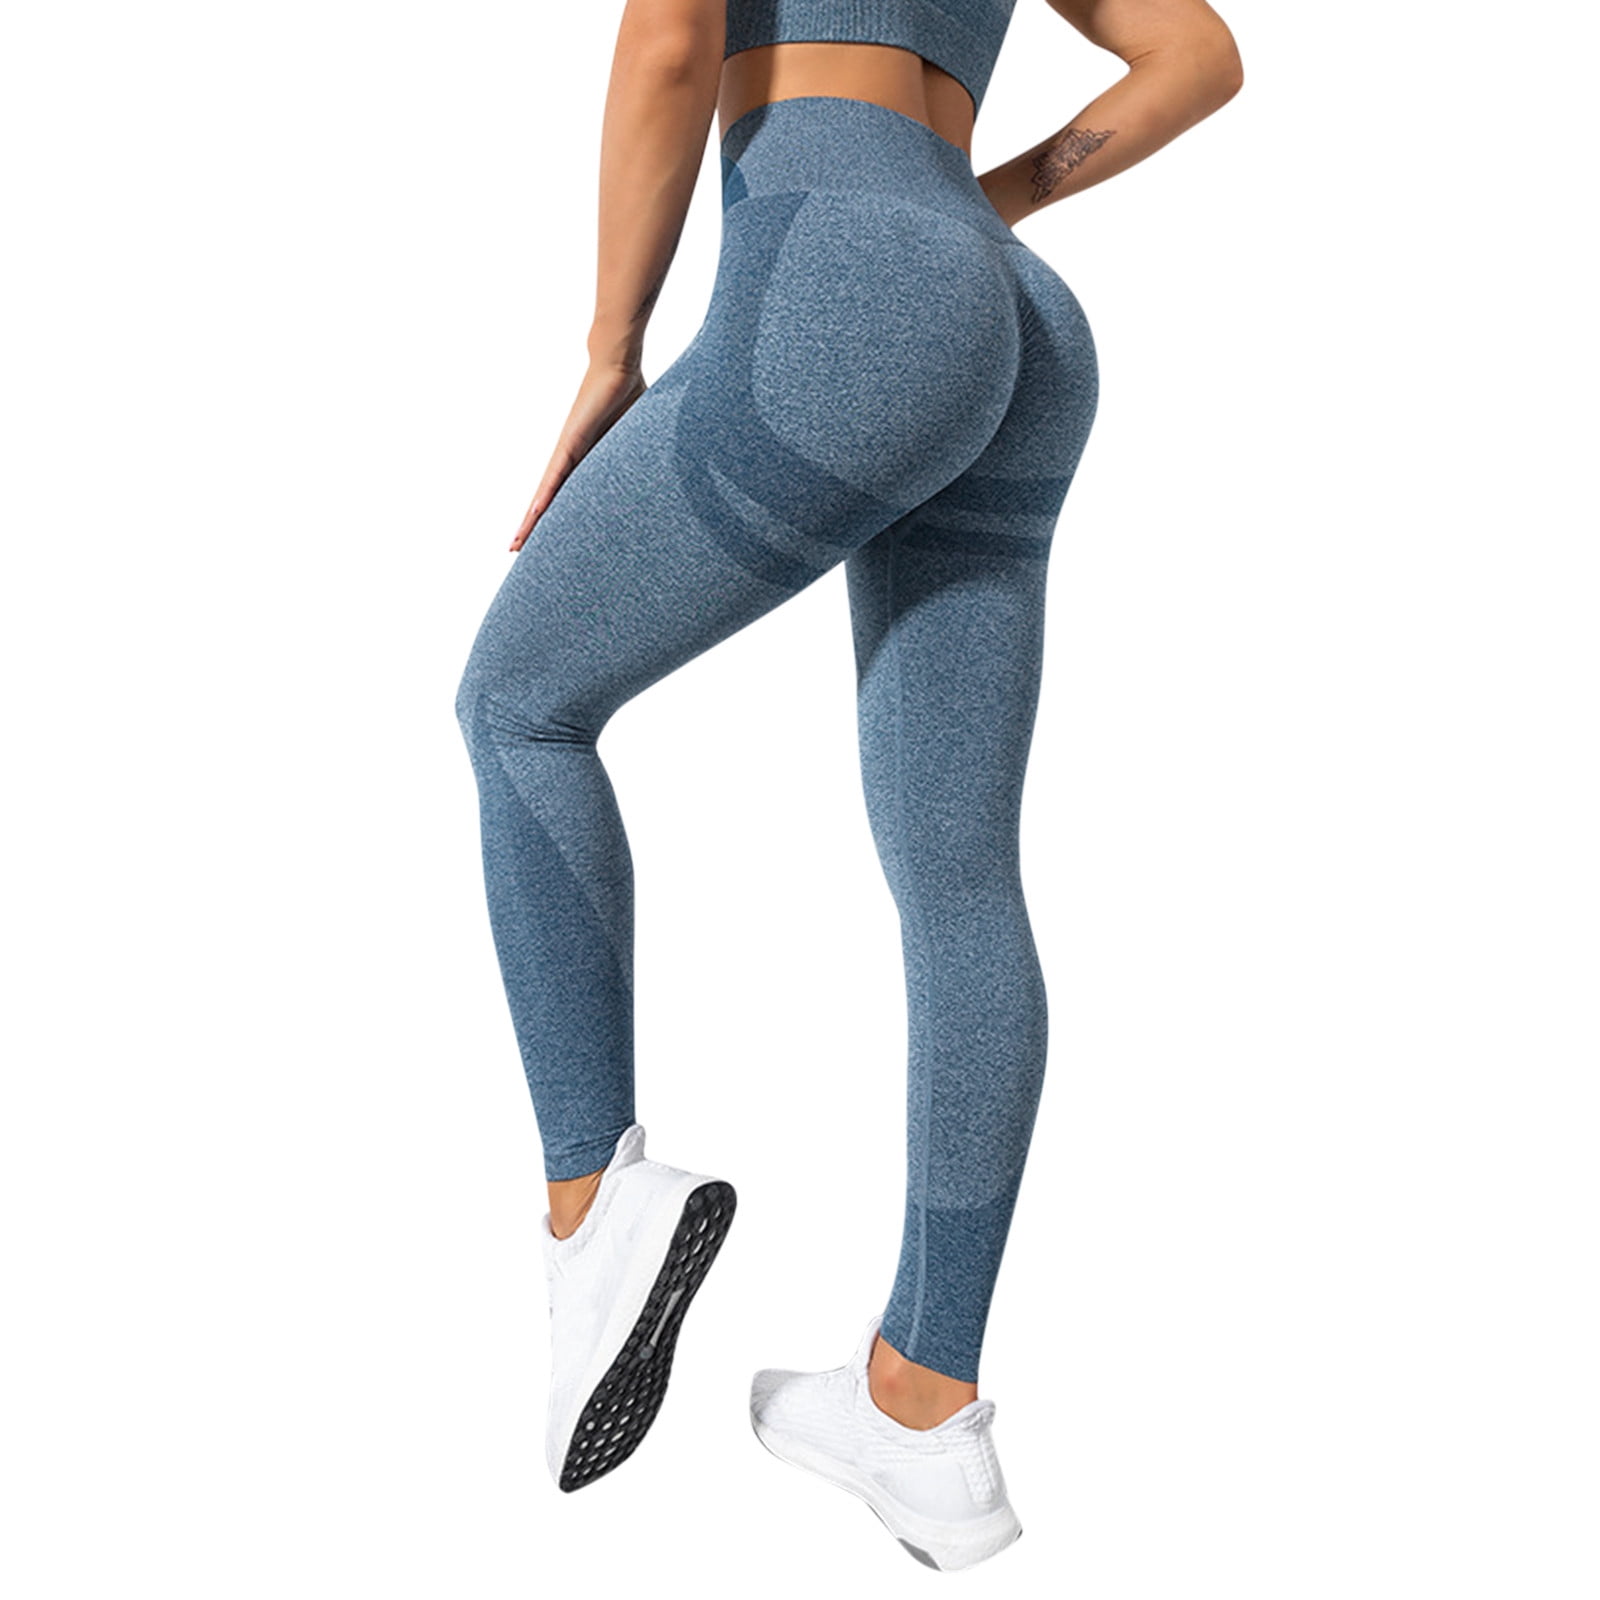 Leggings For Women High Waist -Lifting Seamless Yoga Pants Women Invisible  Leg Shaping Tight-Fitting Sports Running Pleated Peach Fitness Pants 